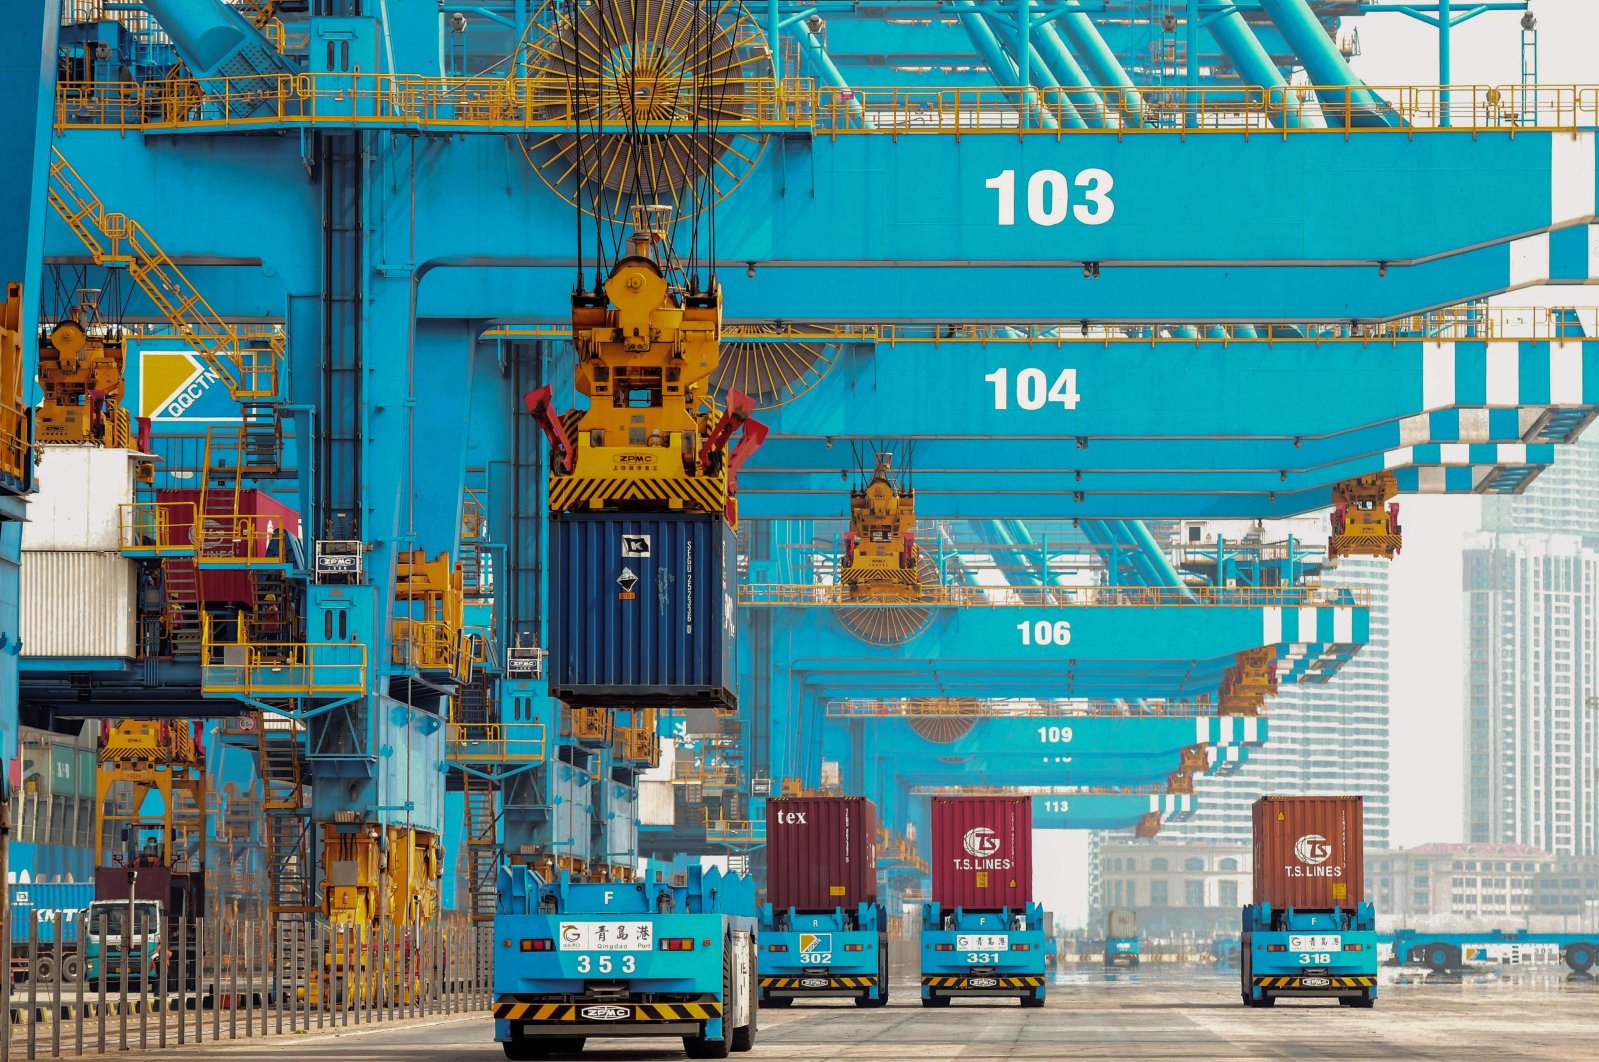 Trucks transporting containers at a port in Qingdao in China's eastern Shandong province, March 31, 2020. (AFP Photo)